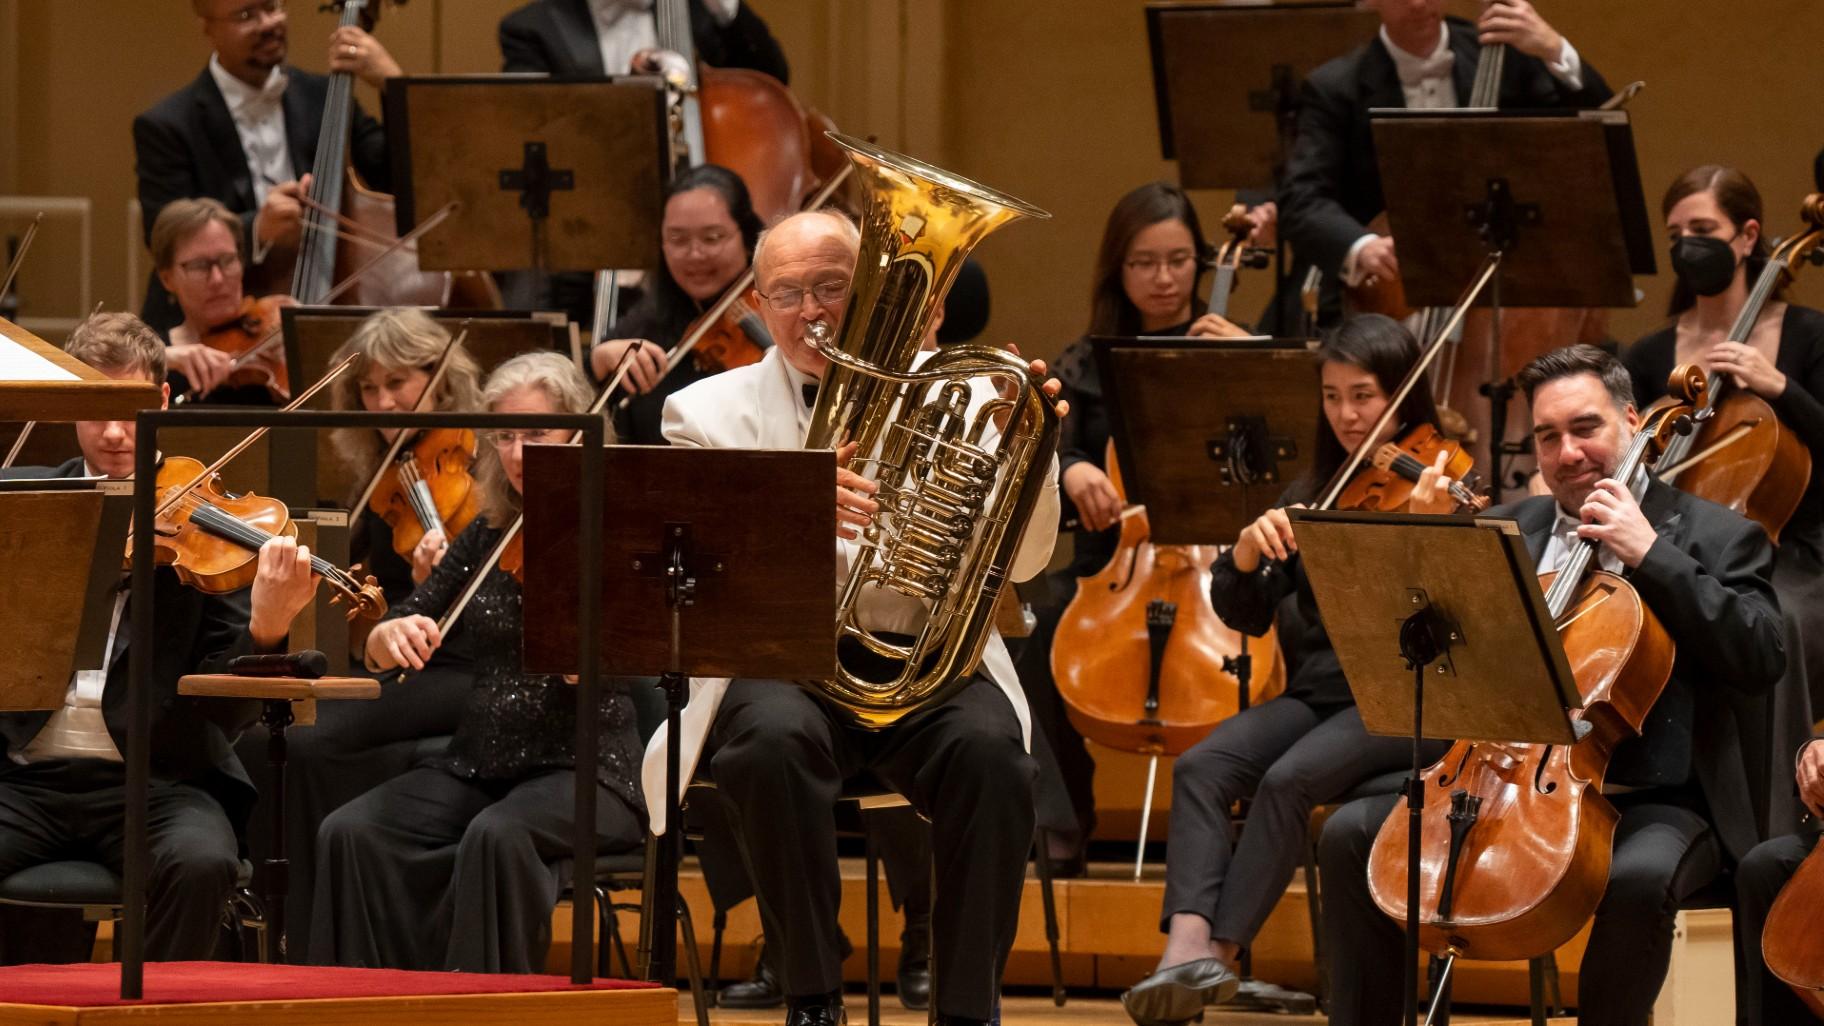 CSO principal tuba Gene Pokorny and the Chicago Symphony Orchestra perform Lalo Schifrin’s “Concerto for Tuba and Orchestra.” (Todd Rosenberg)